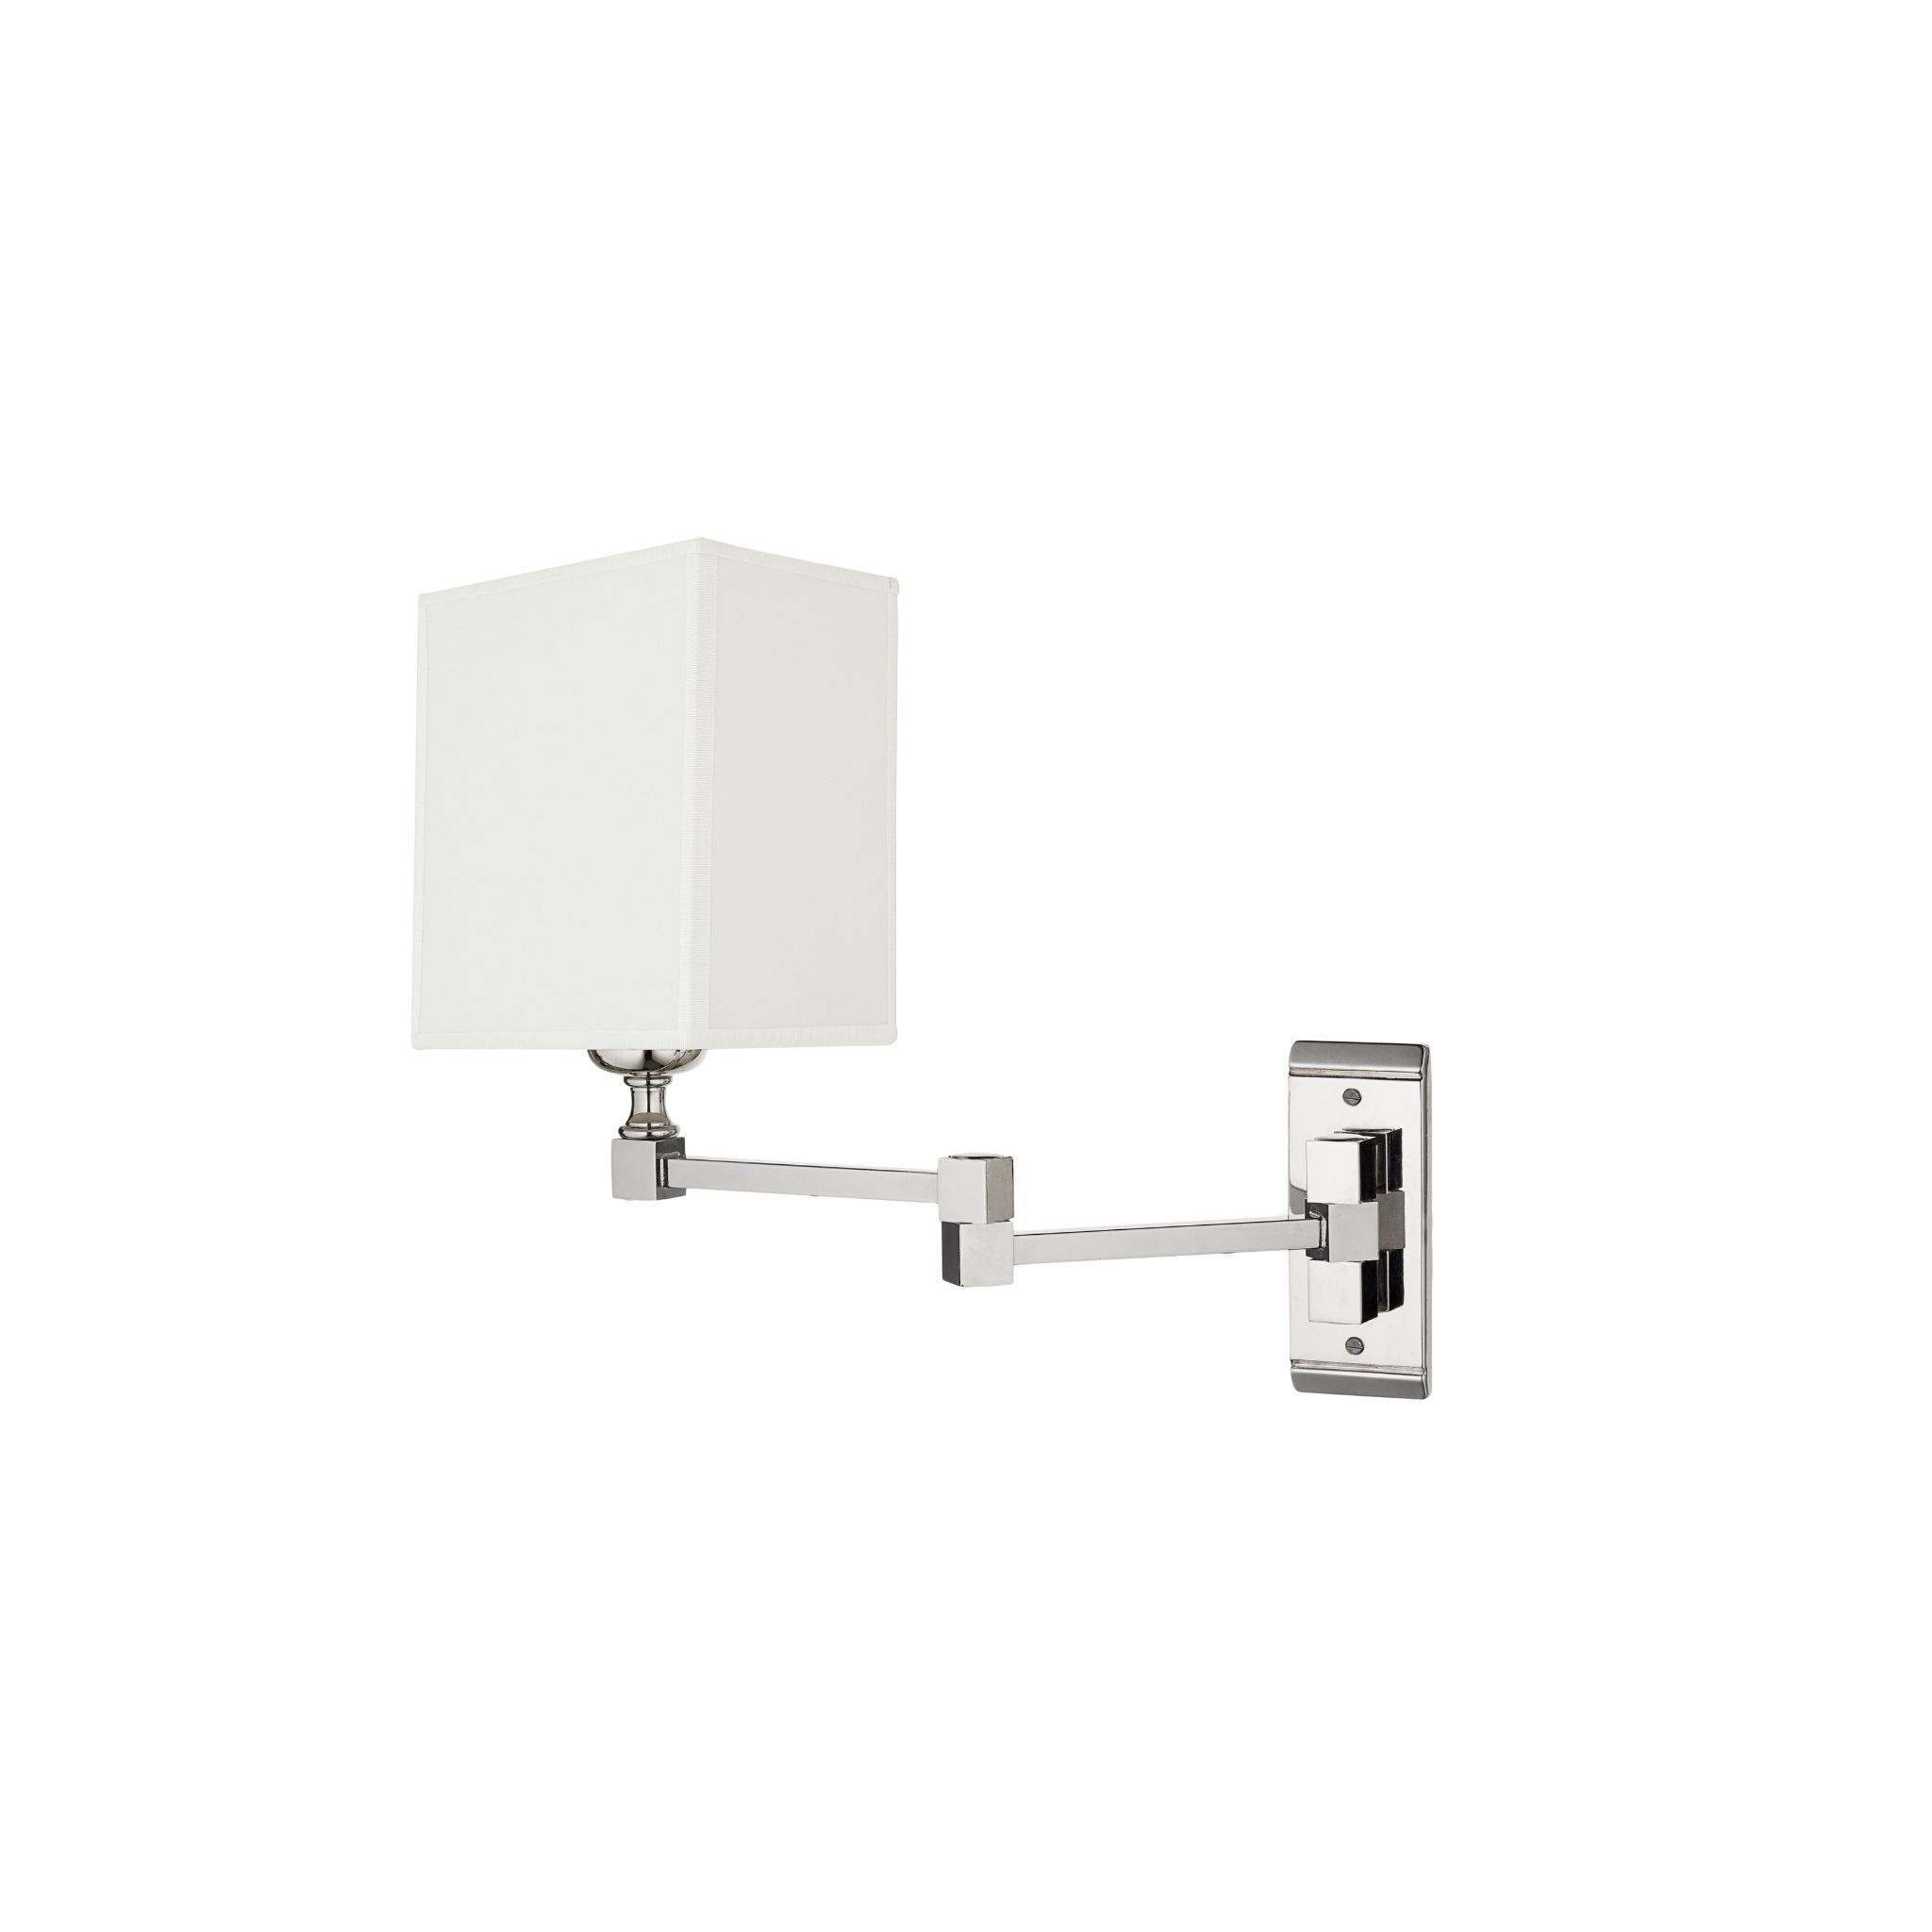 Studio brass wall light with jointed square arm - ilbronzetto